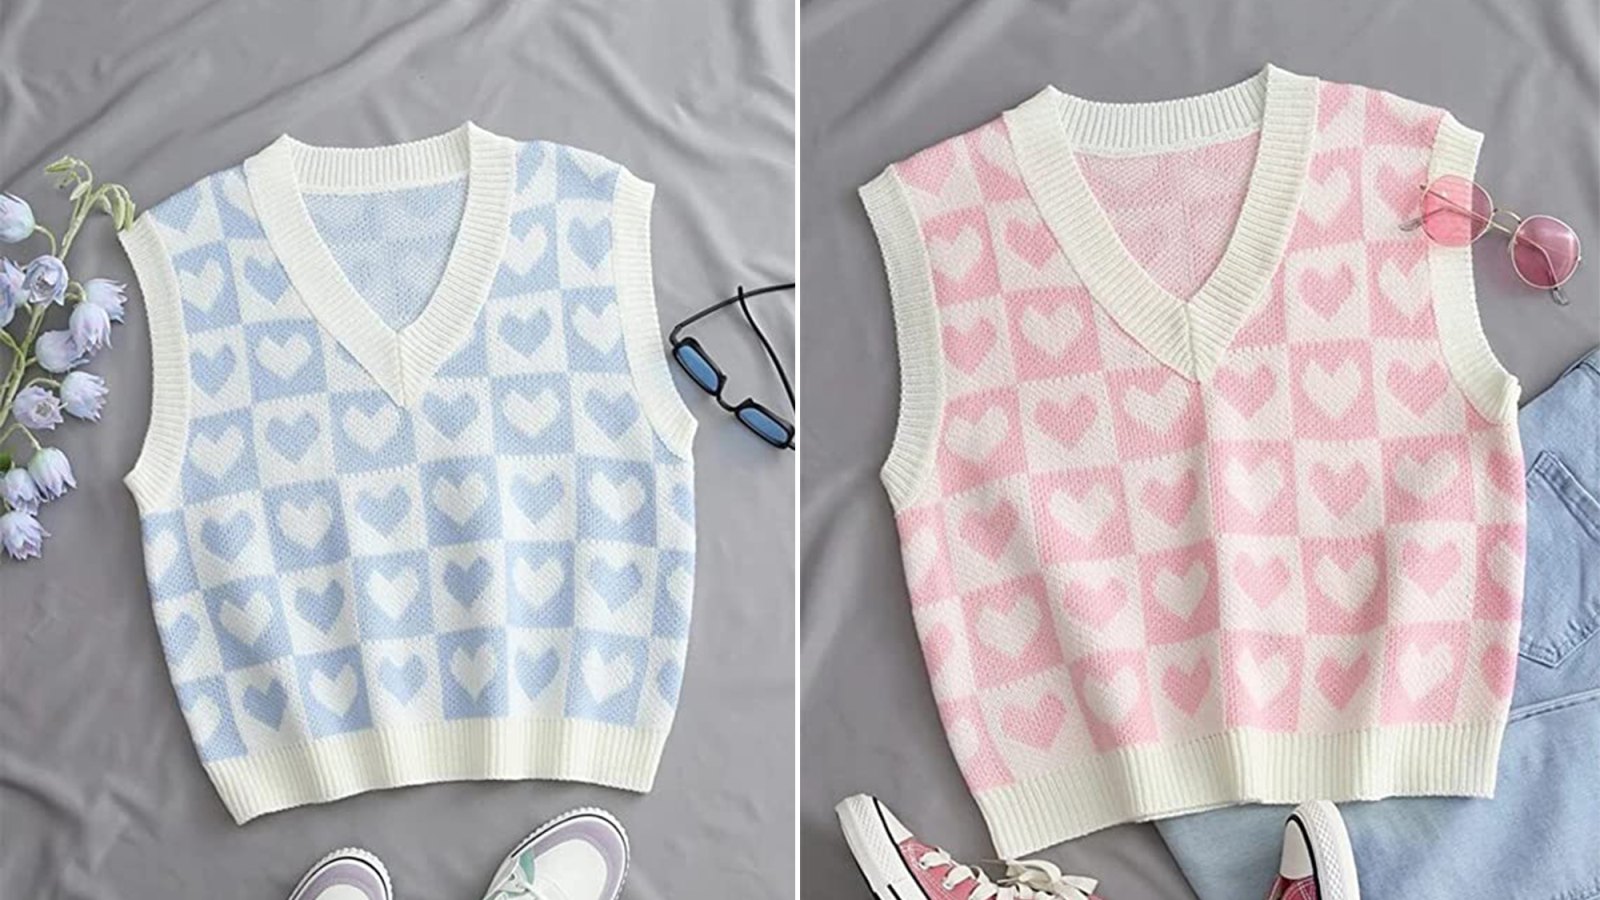 Safrisior Heart Print Sweater Vest Is a Cute Take on a Classic